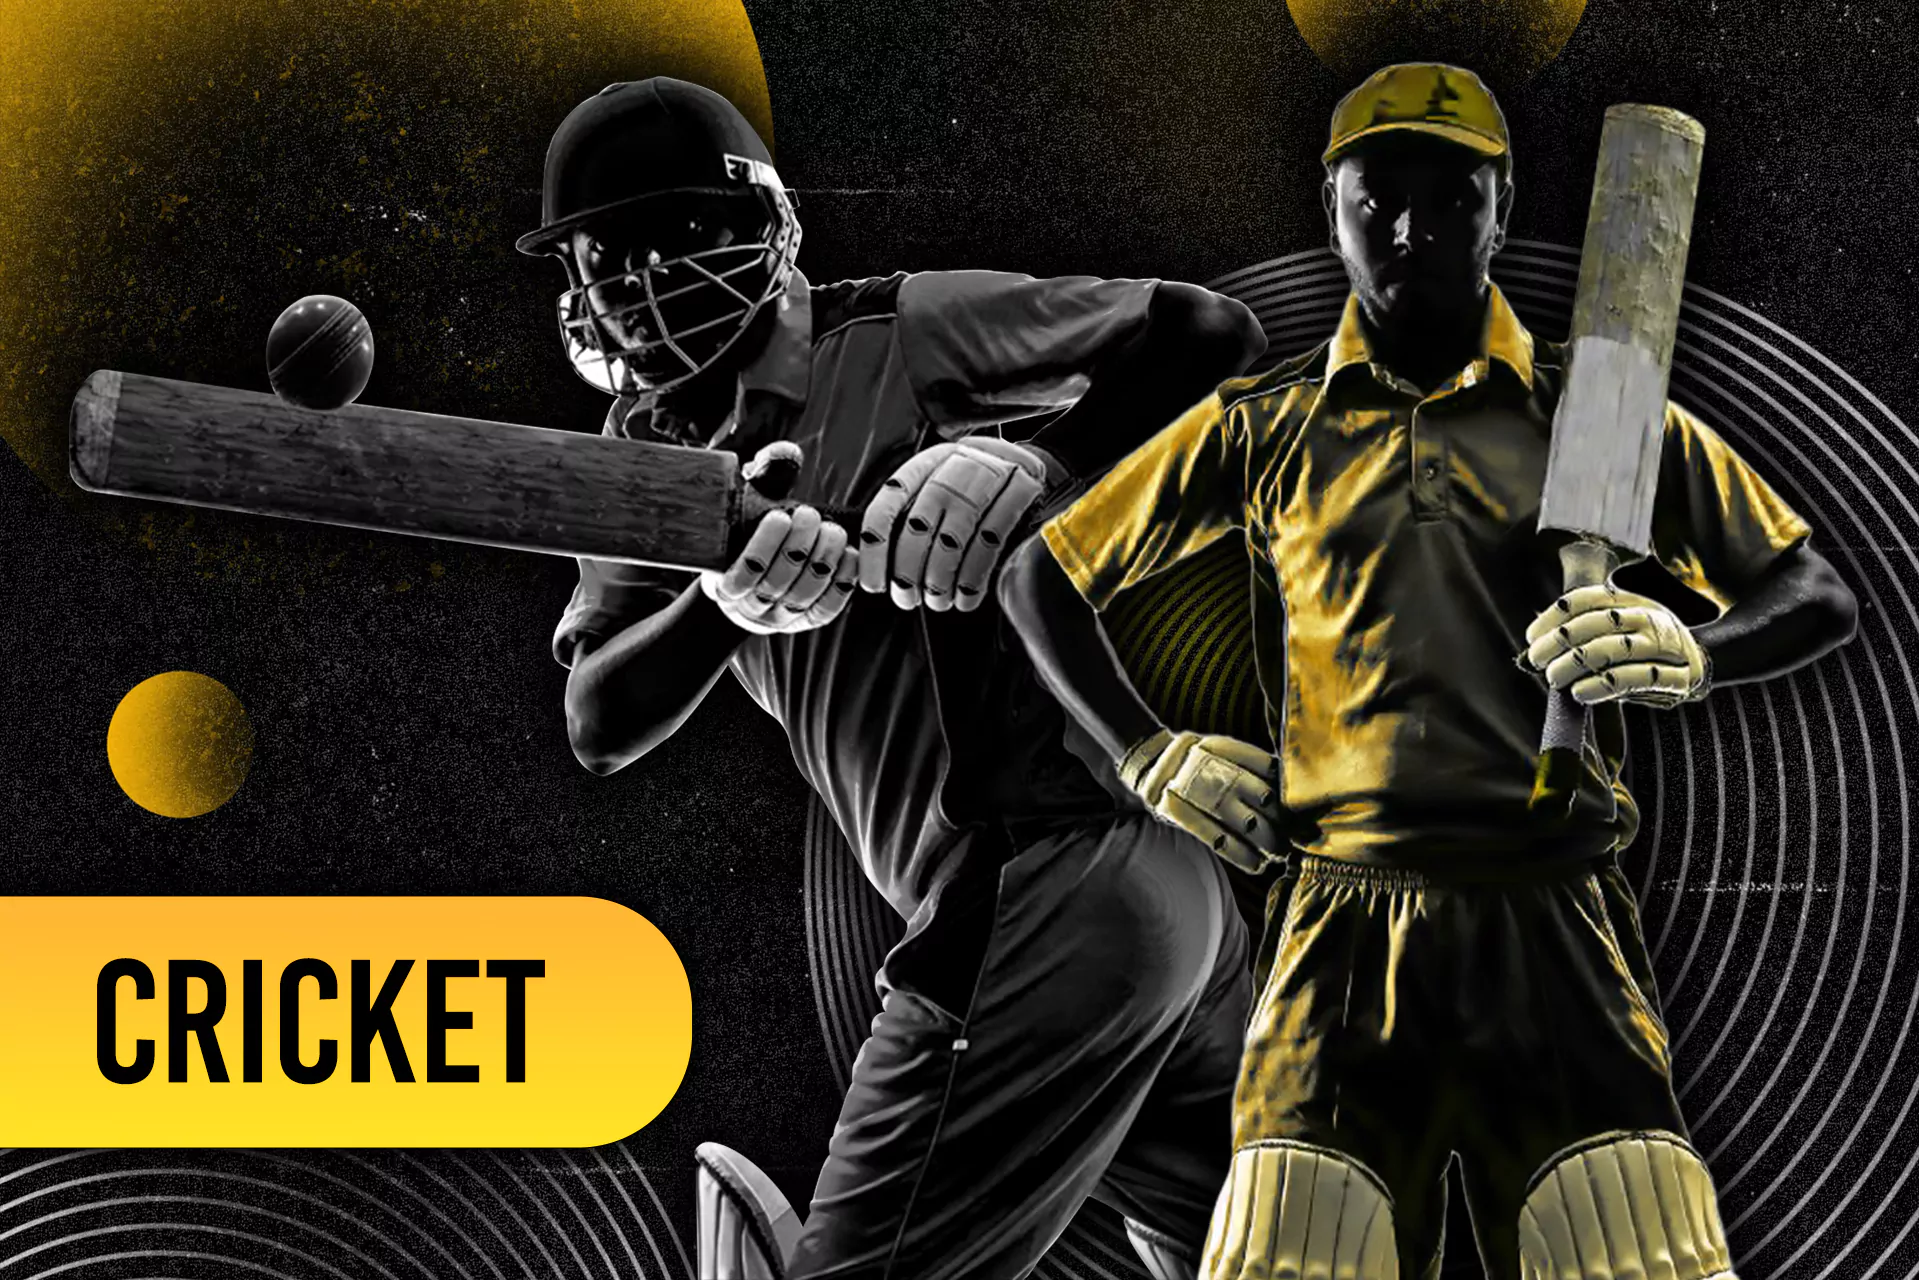 Place bets on favorite cricket teams and players at BetVisa.